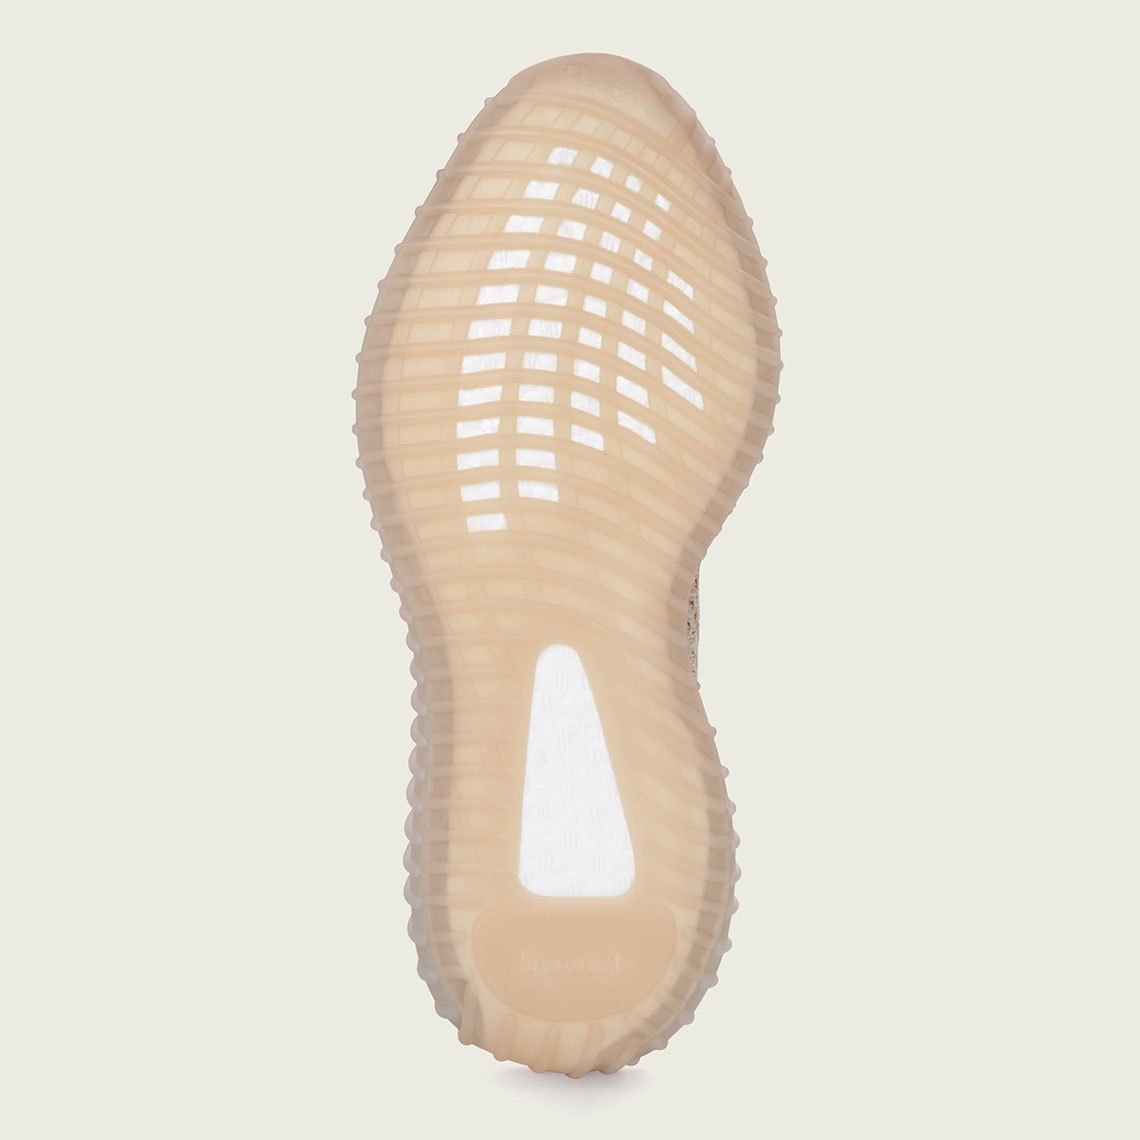 Adidas Yeezy Boost 350 V2 Eg7490 Official Images 3